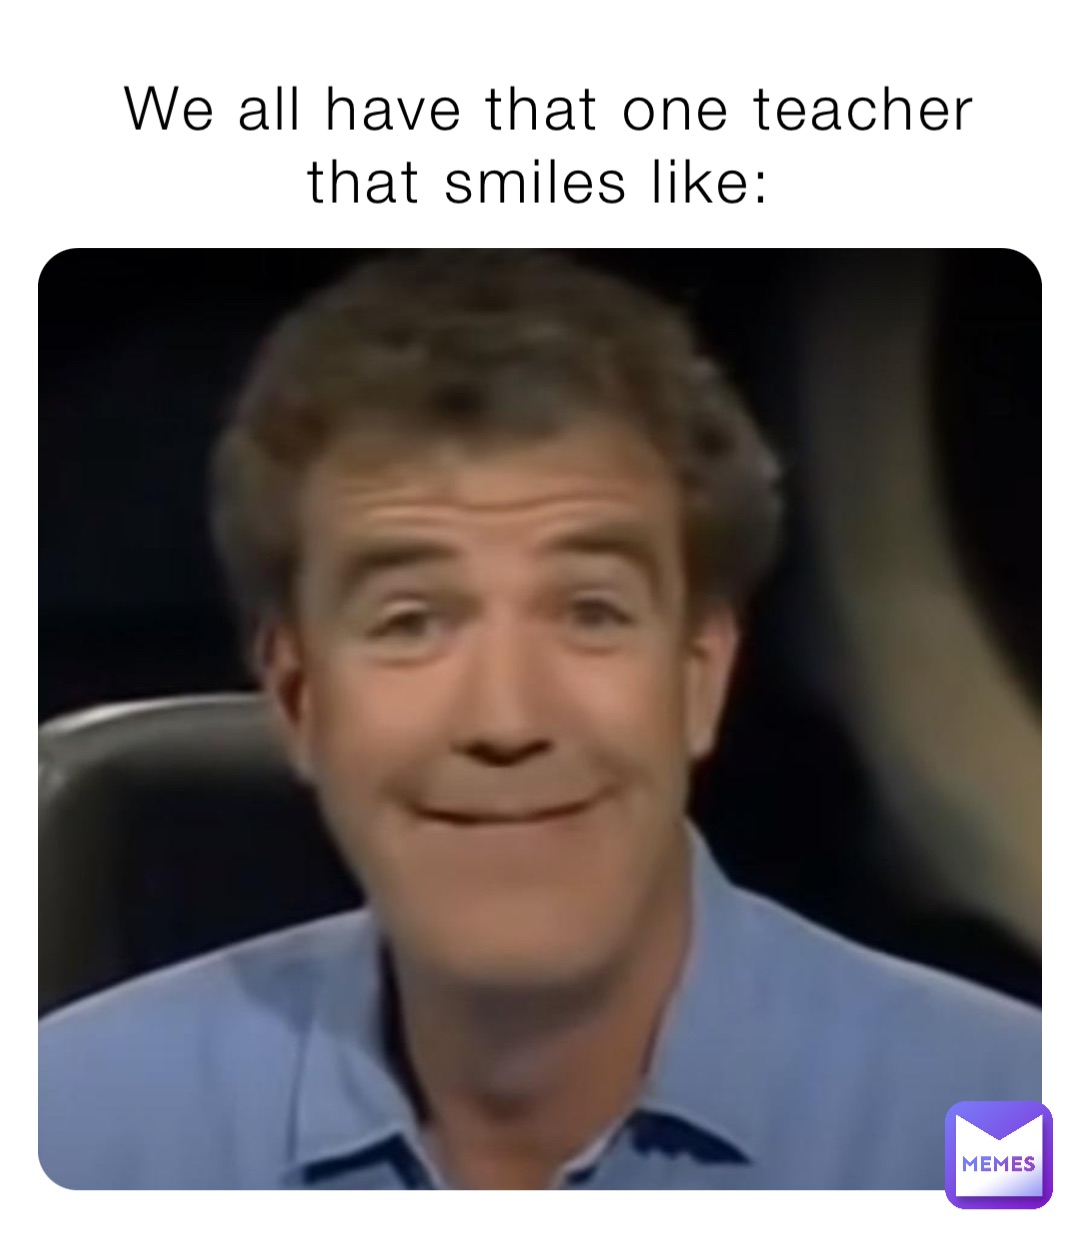 We all have that one teacher that smiles like: